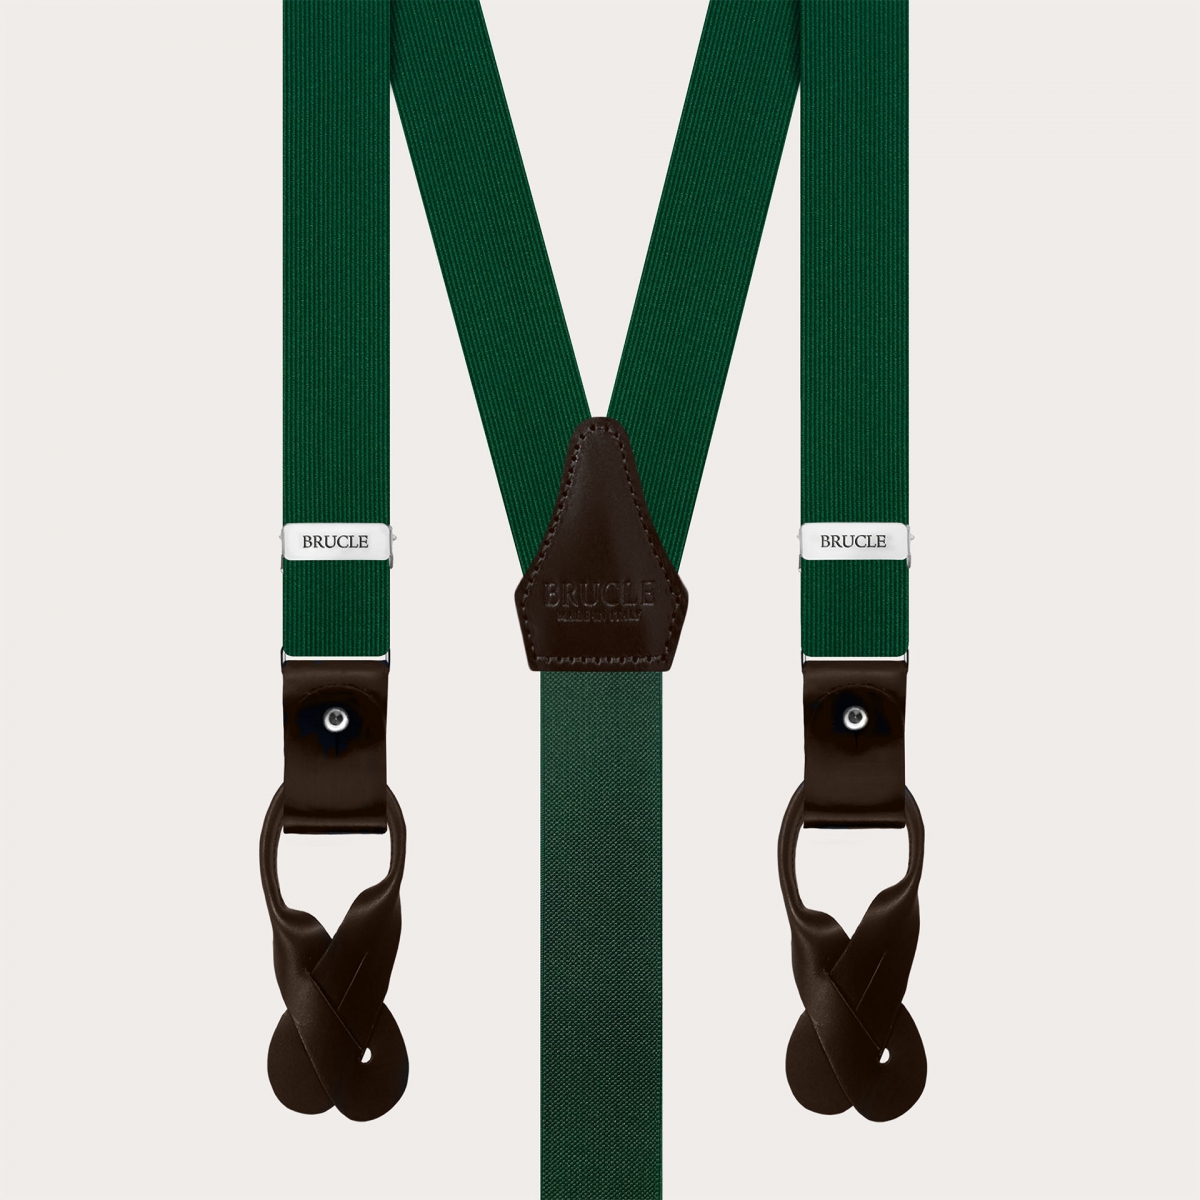 Thin green silk suspenders with dark brown leather, use with buttons or clips